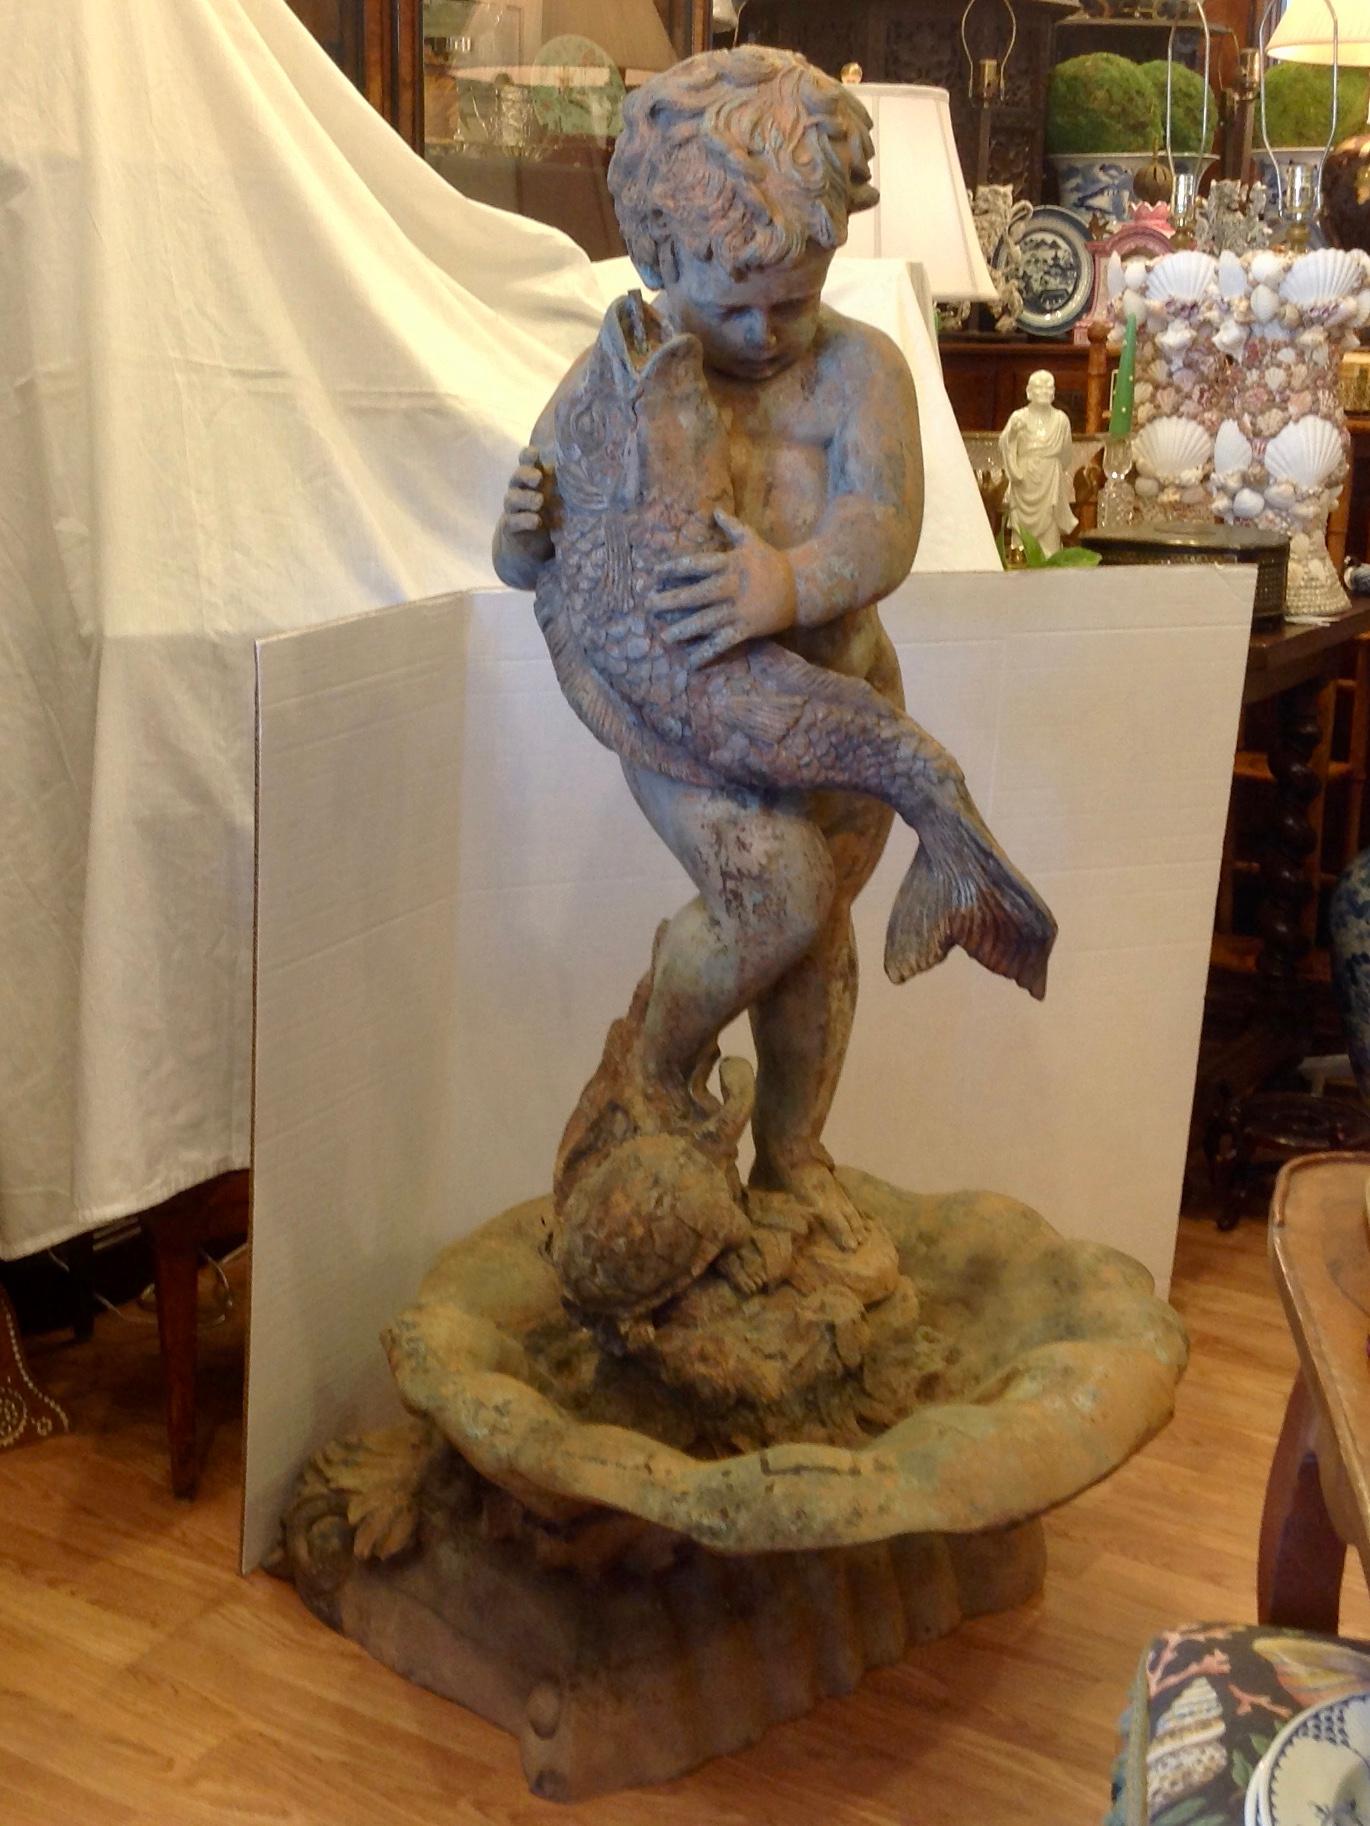 Outstanding design fashioned as a boy struggling to hold a fish. 
The boy is standing on a 